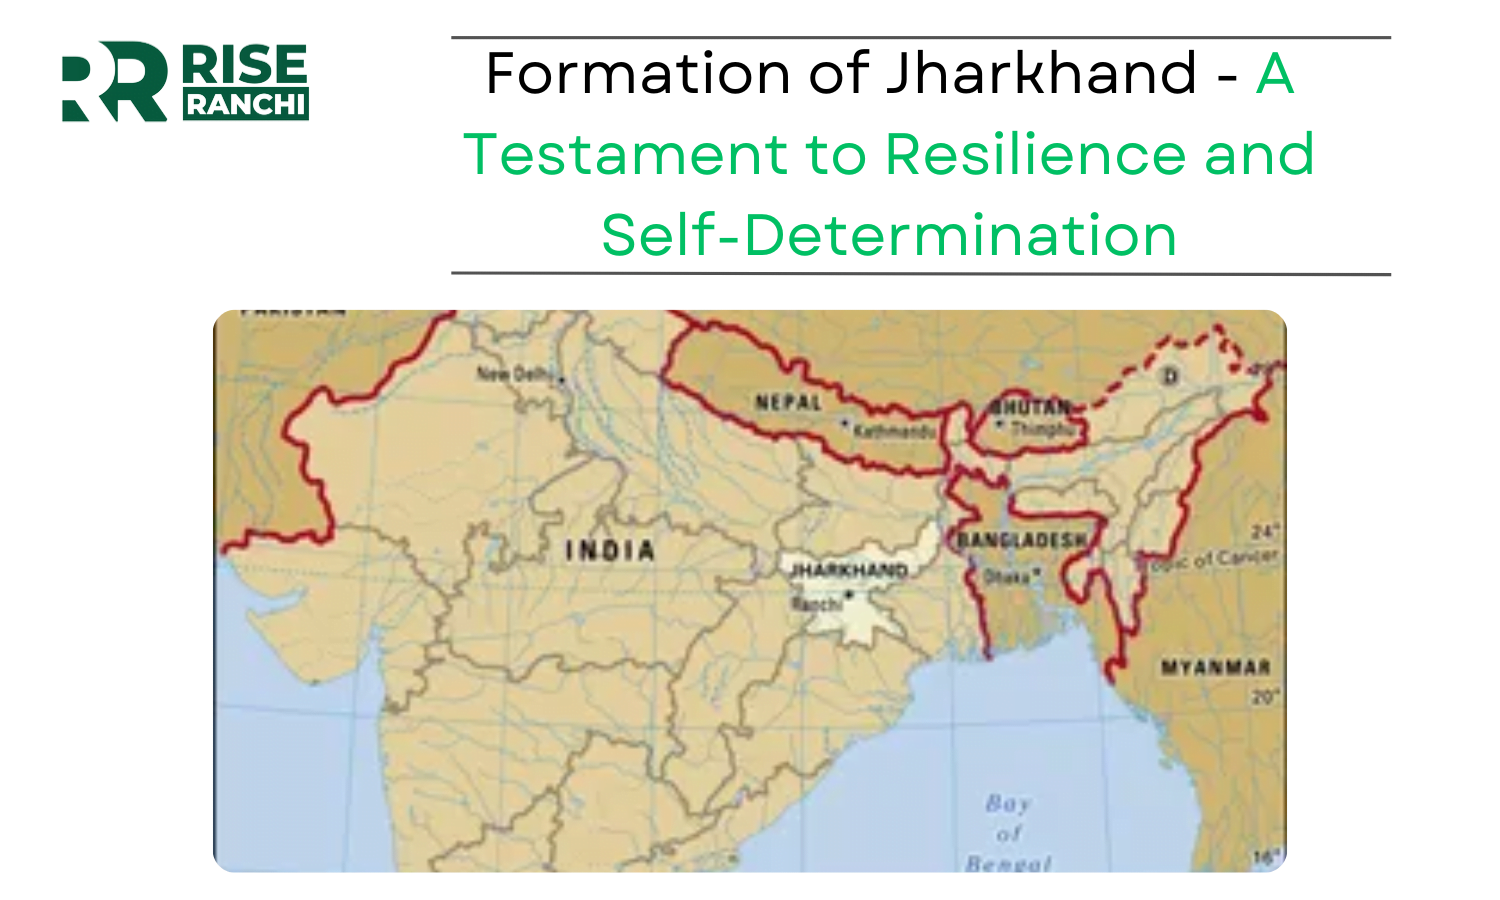 Formation of Jharkhand - A resilient movement